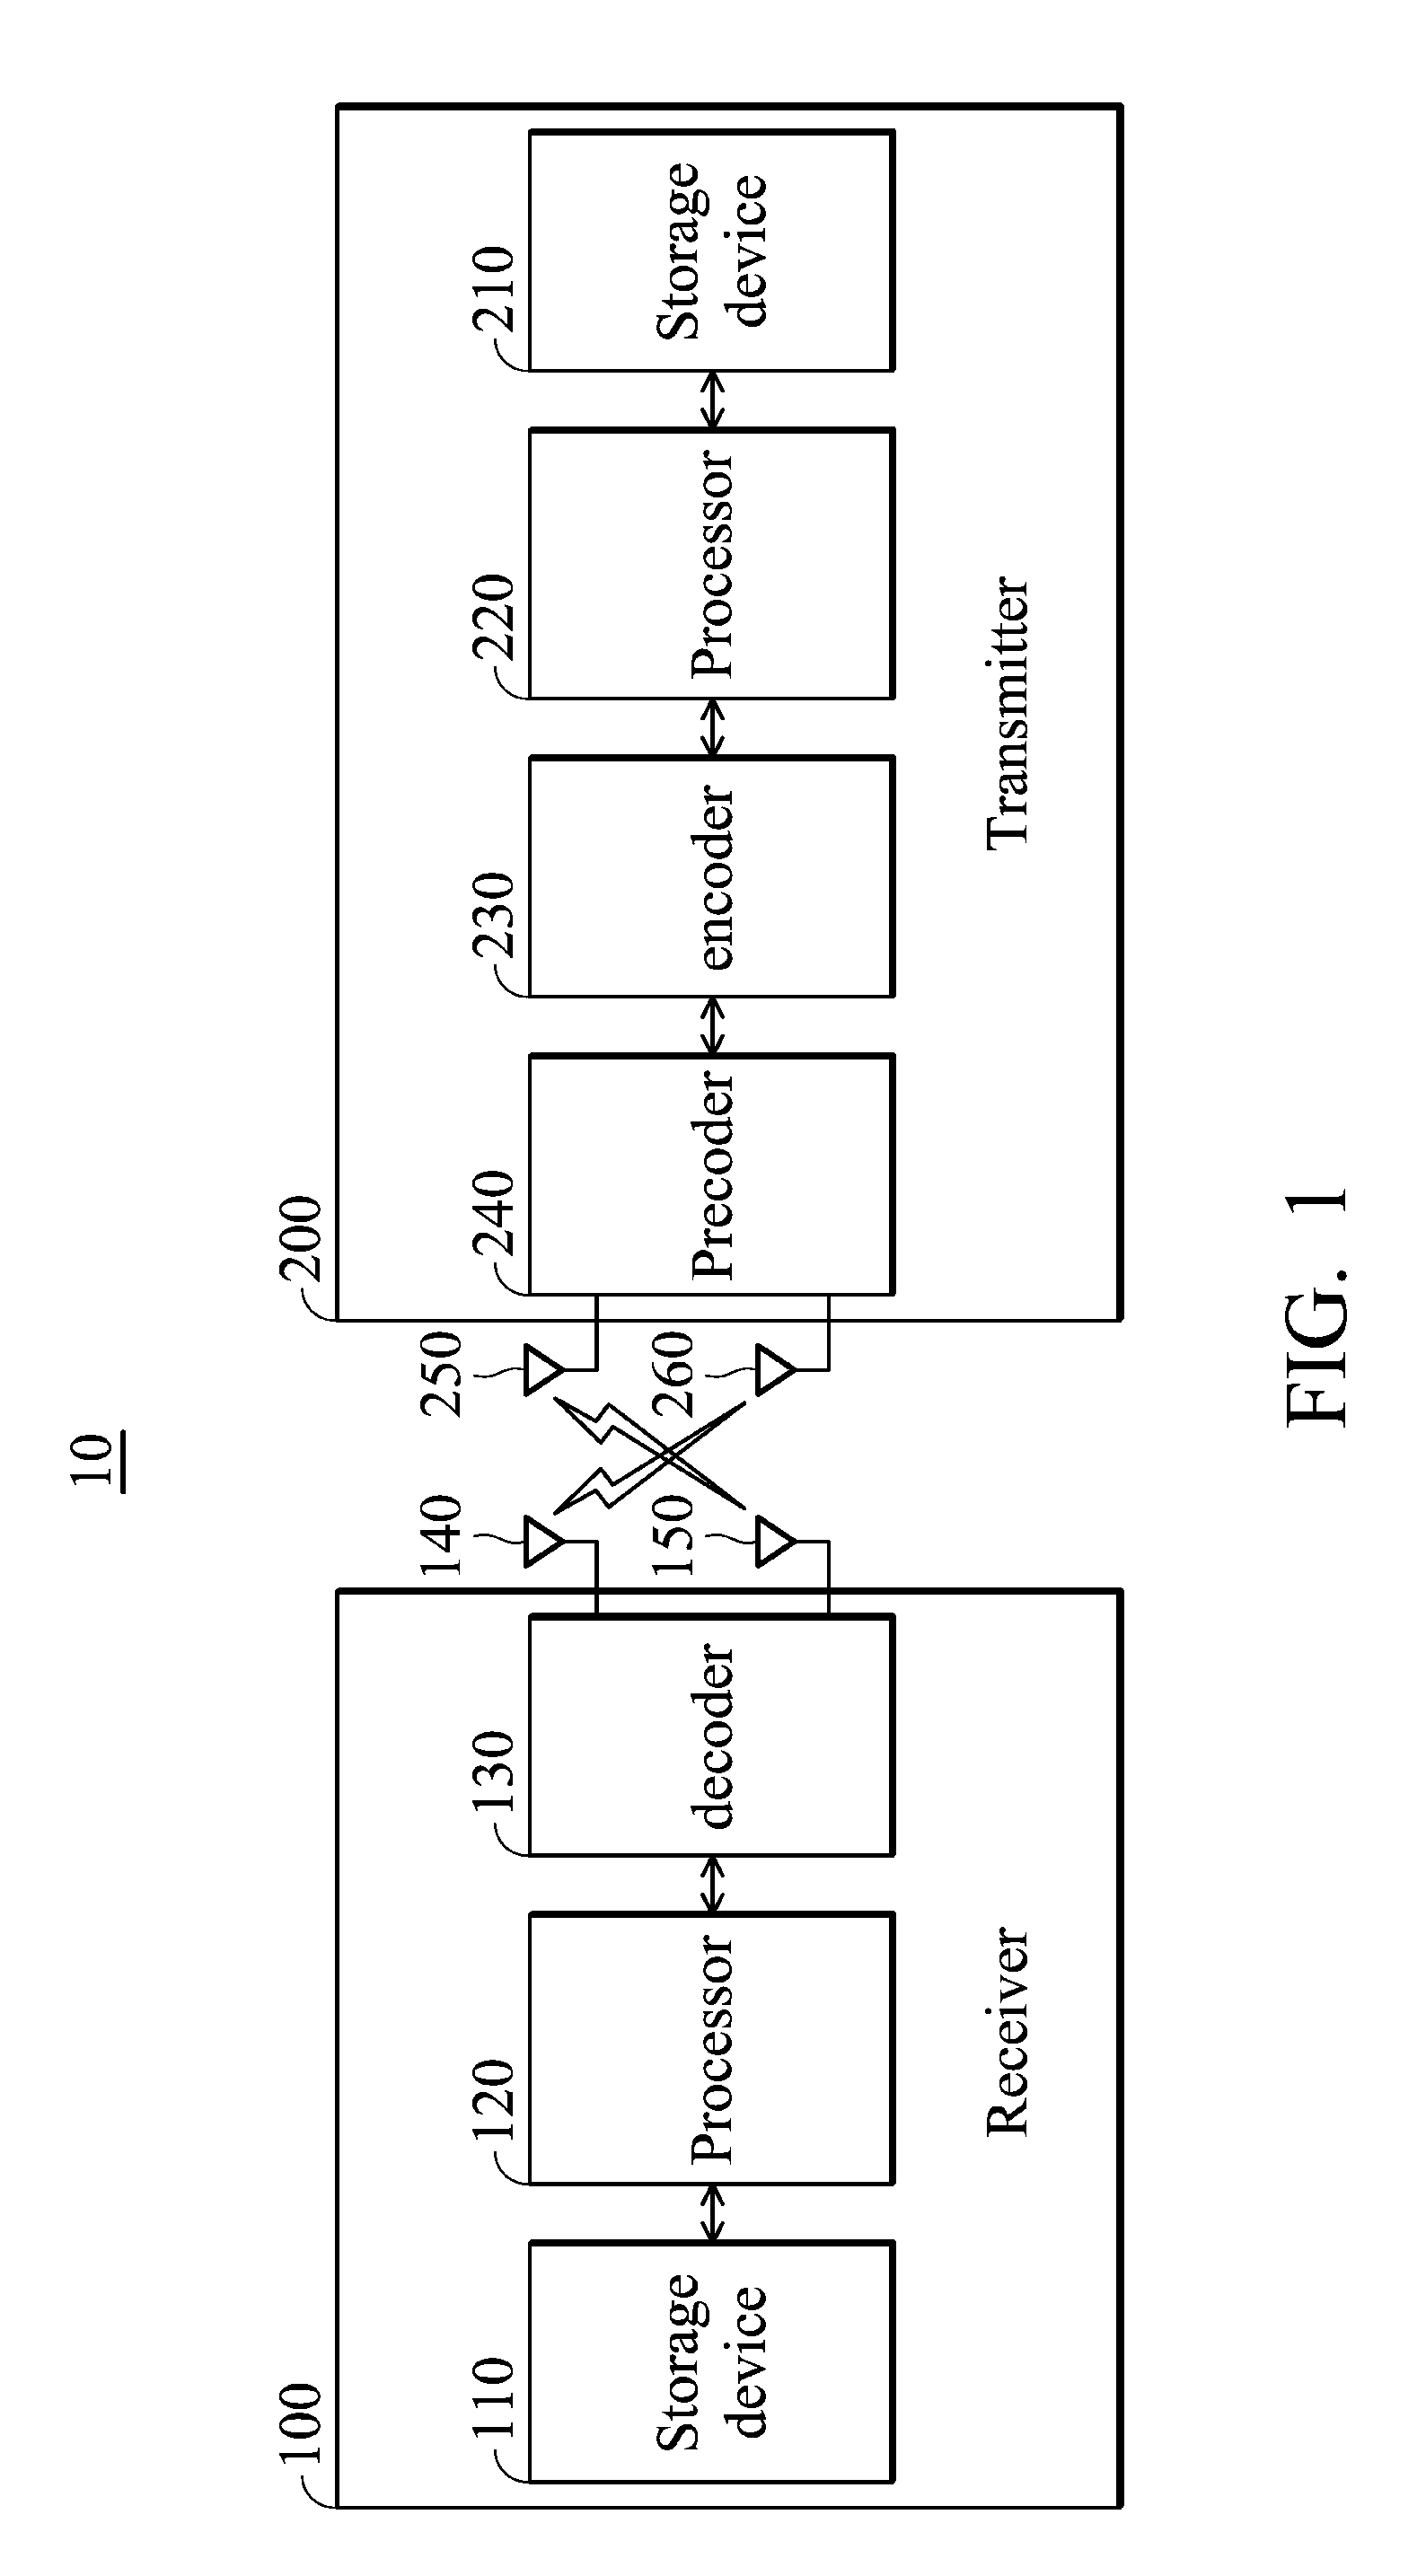 Multiple-input multiple-output systems and methods for wireless communication thereof for reducing the quantization effect of precoding operations utilizing a finite codebook